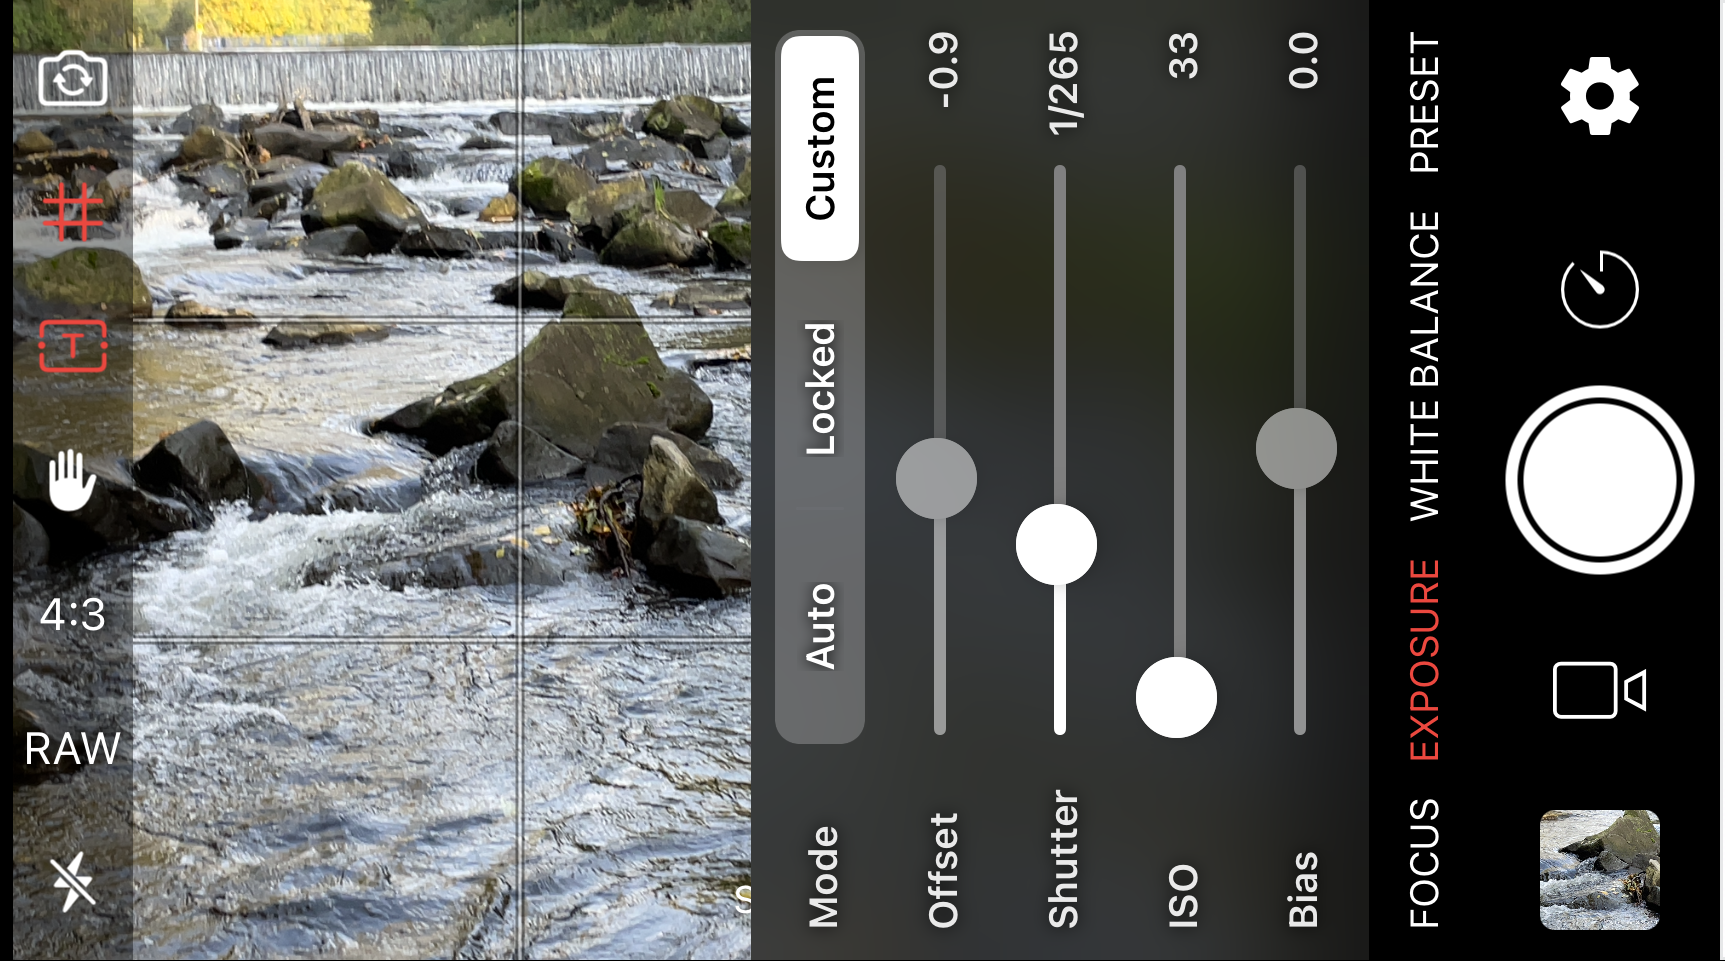 How to take pictures of a waterfall or flowing water with mobile phone